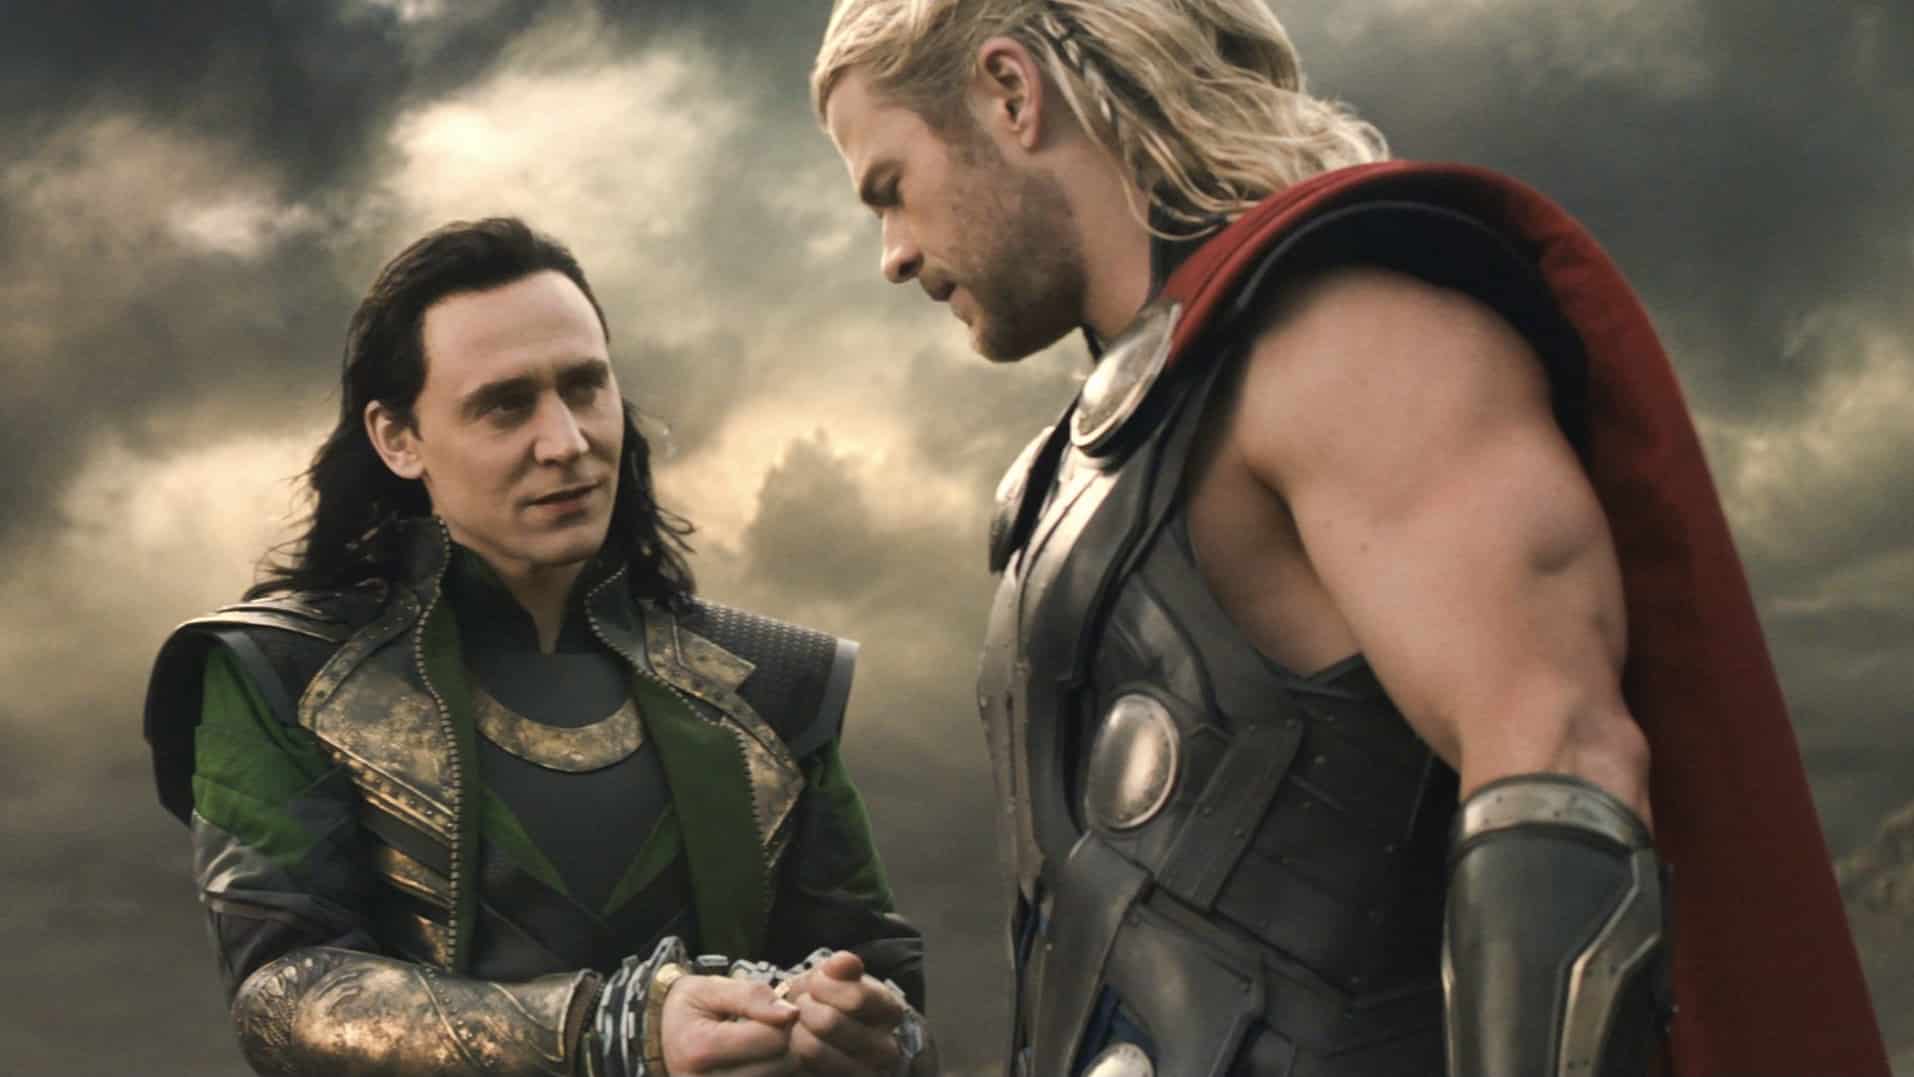 loki-and-thor-in-thor-the-dark-world-from-phase-2-of-the-marvel-cinematic-universe